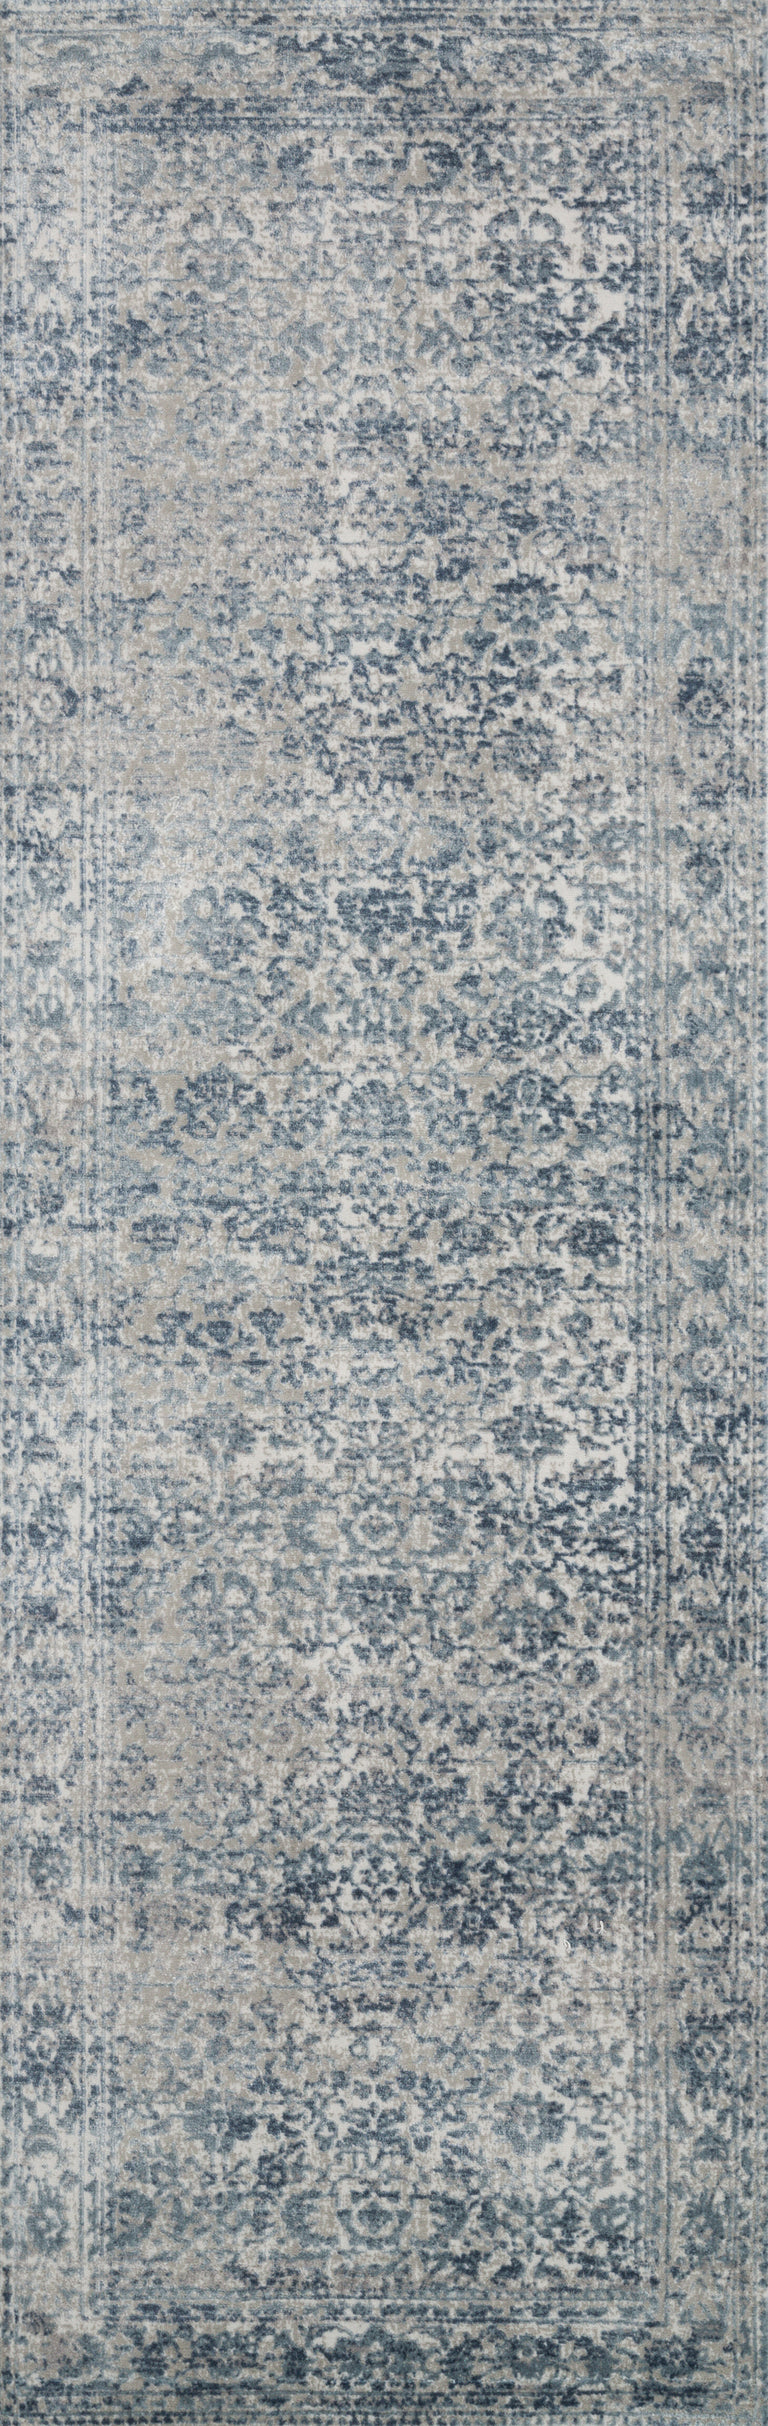 Loloi Rugs Patina Collection Rug in Sky, Stone - 7'10" x 10'10"